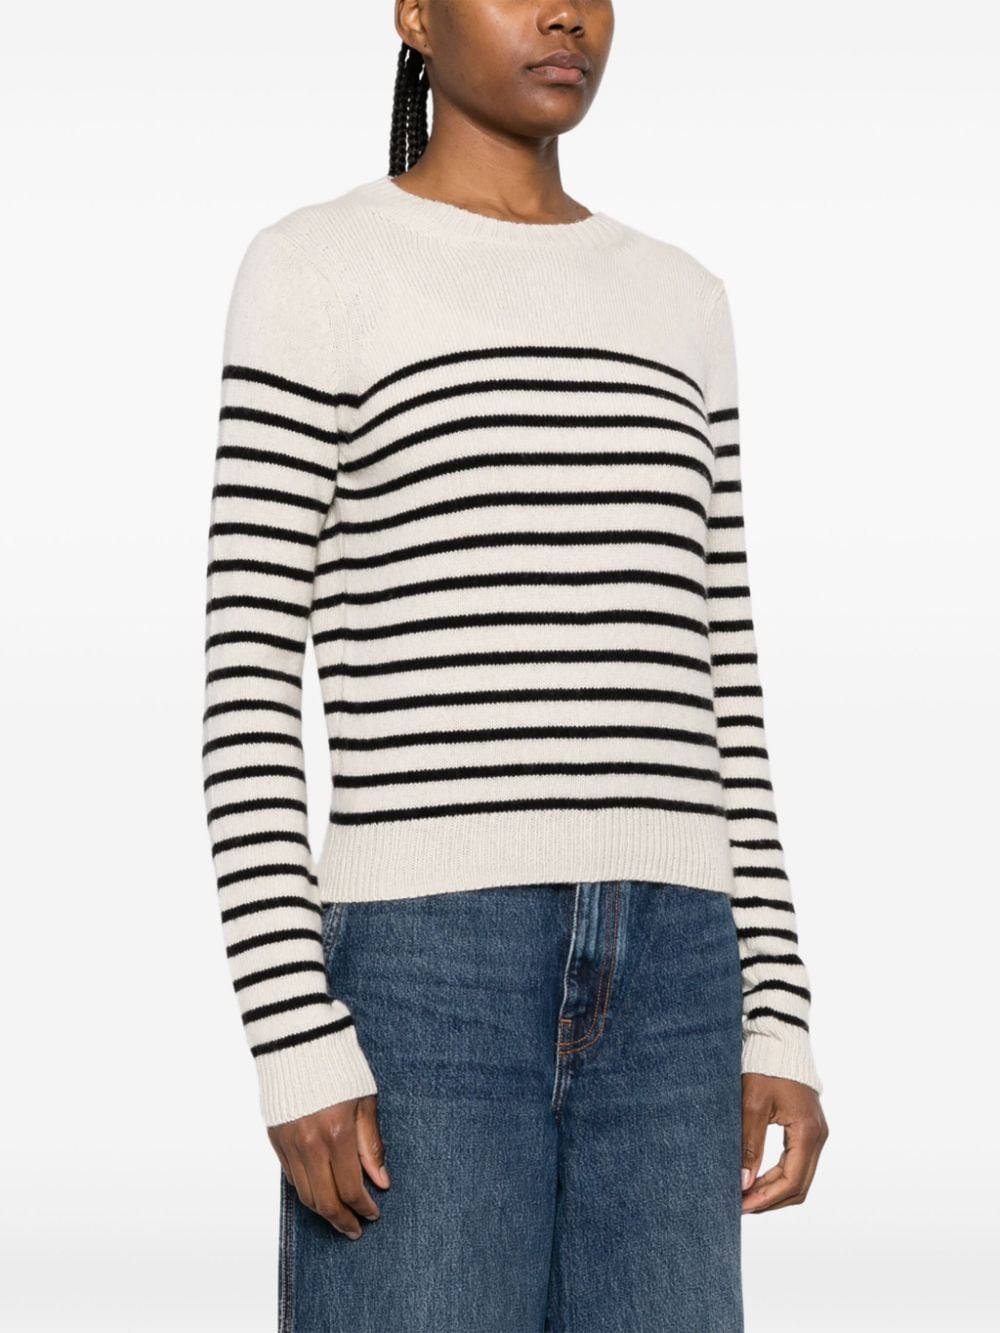 Elegant Women's Cashmere Sweater in Chic Beige and Black Stripes